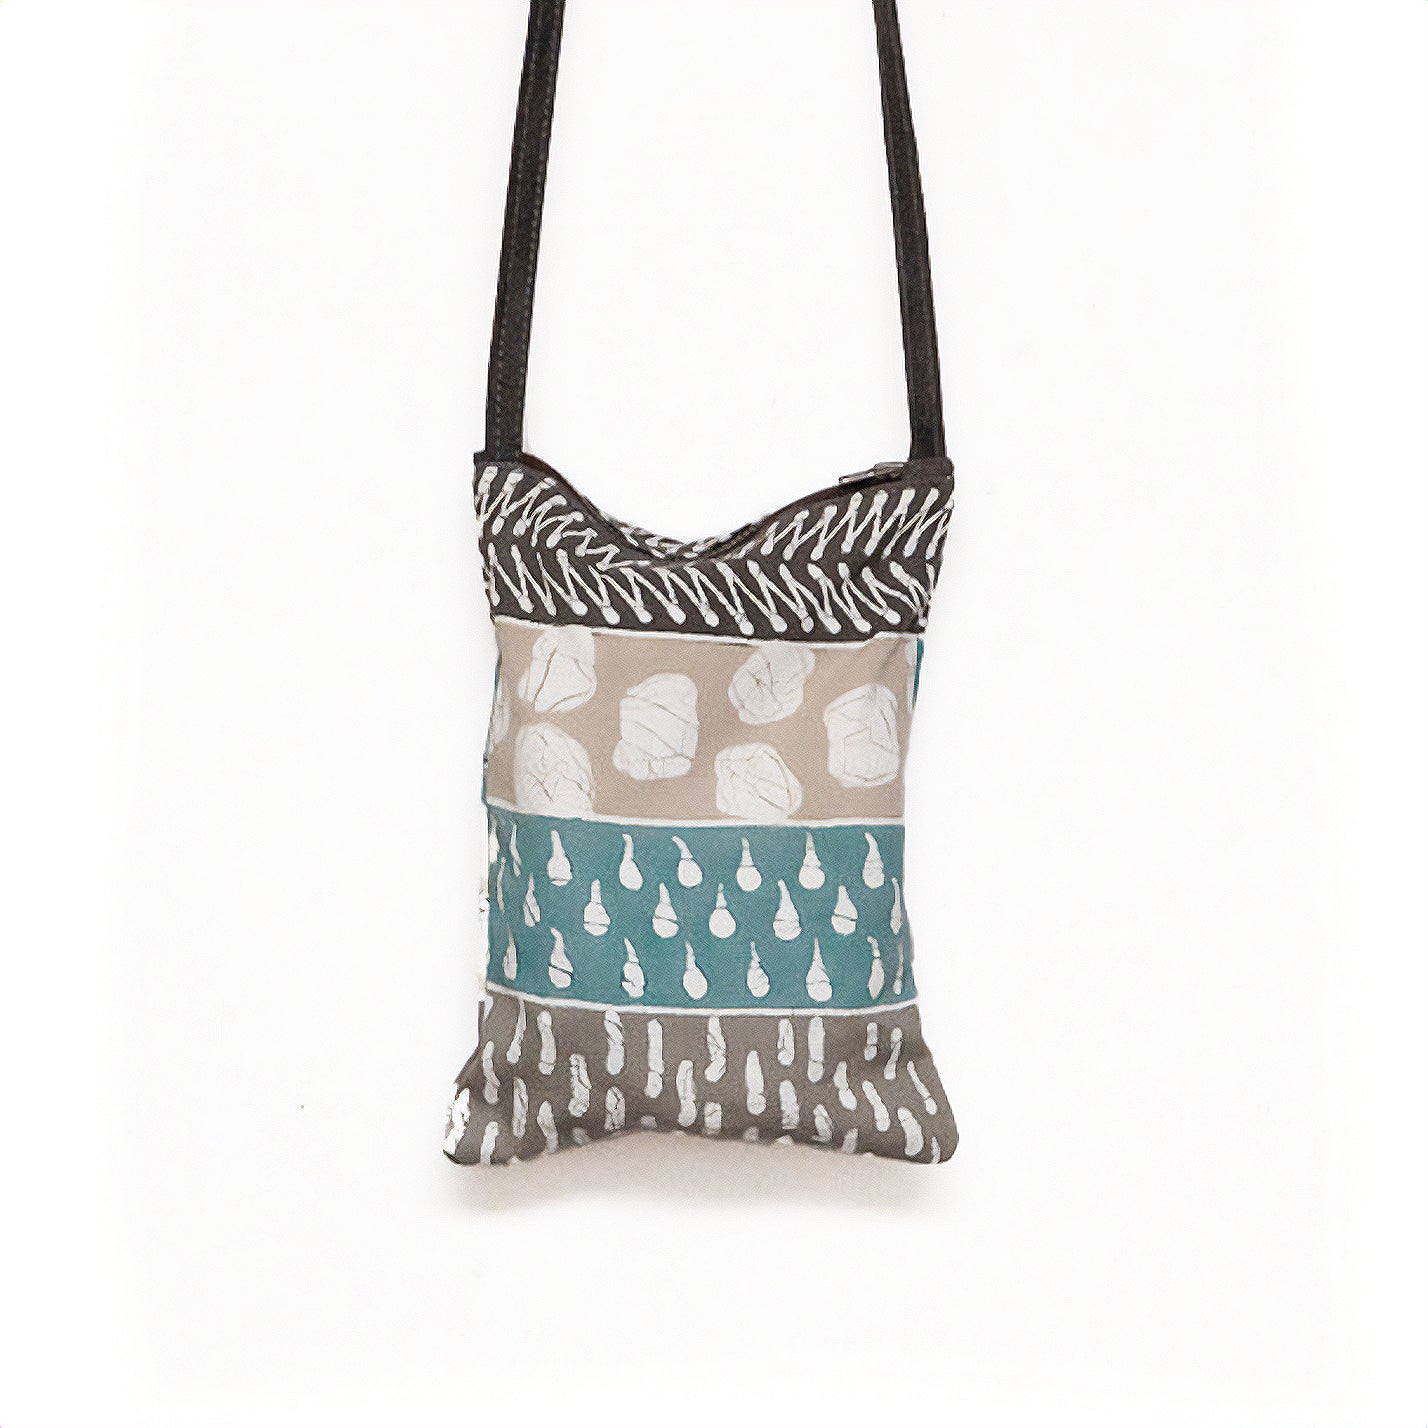 The perfect bohemian chic passport bag, adorned with a mix of African inspired patterns and made from 100% cotton.